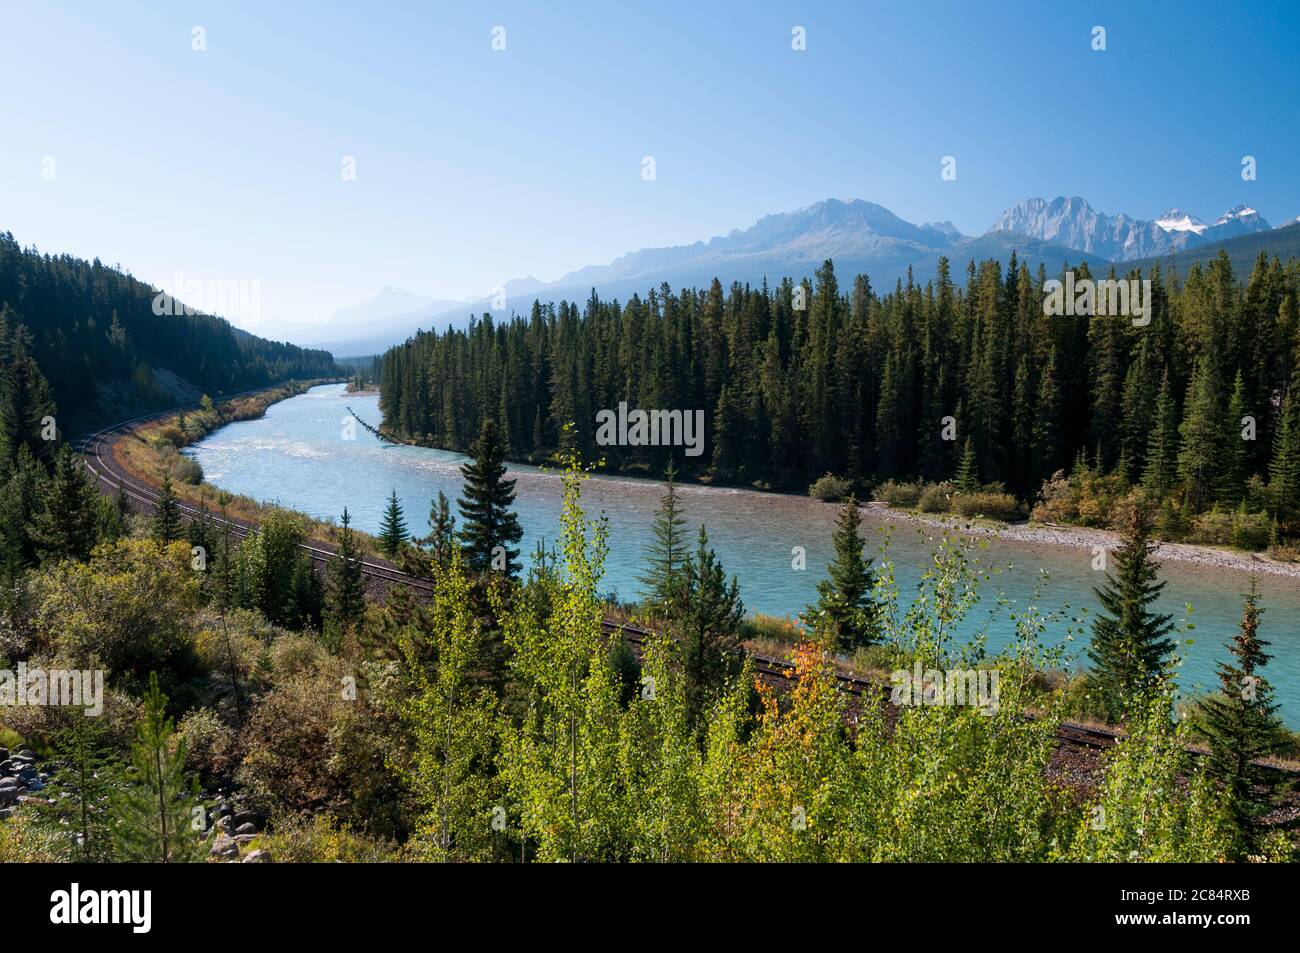 Morant's Curve on the Canadian Pacific Railroad, by the Bow River near Lake Louise, Alberta, Canada. Stock Photo